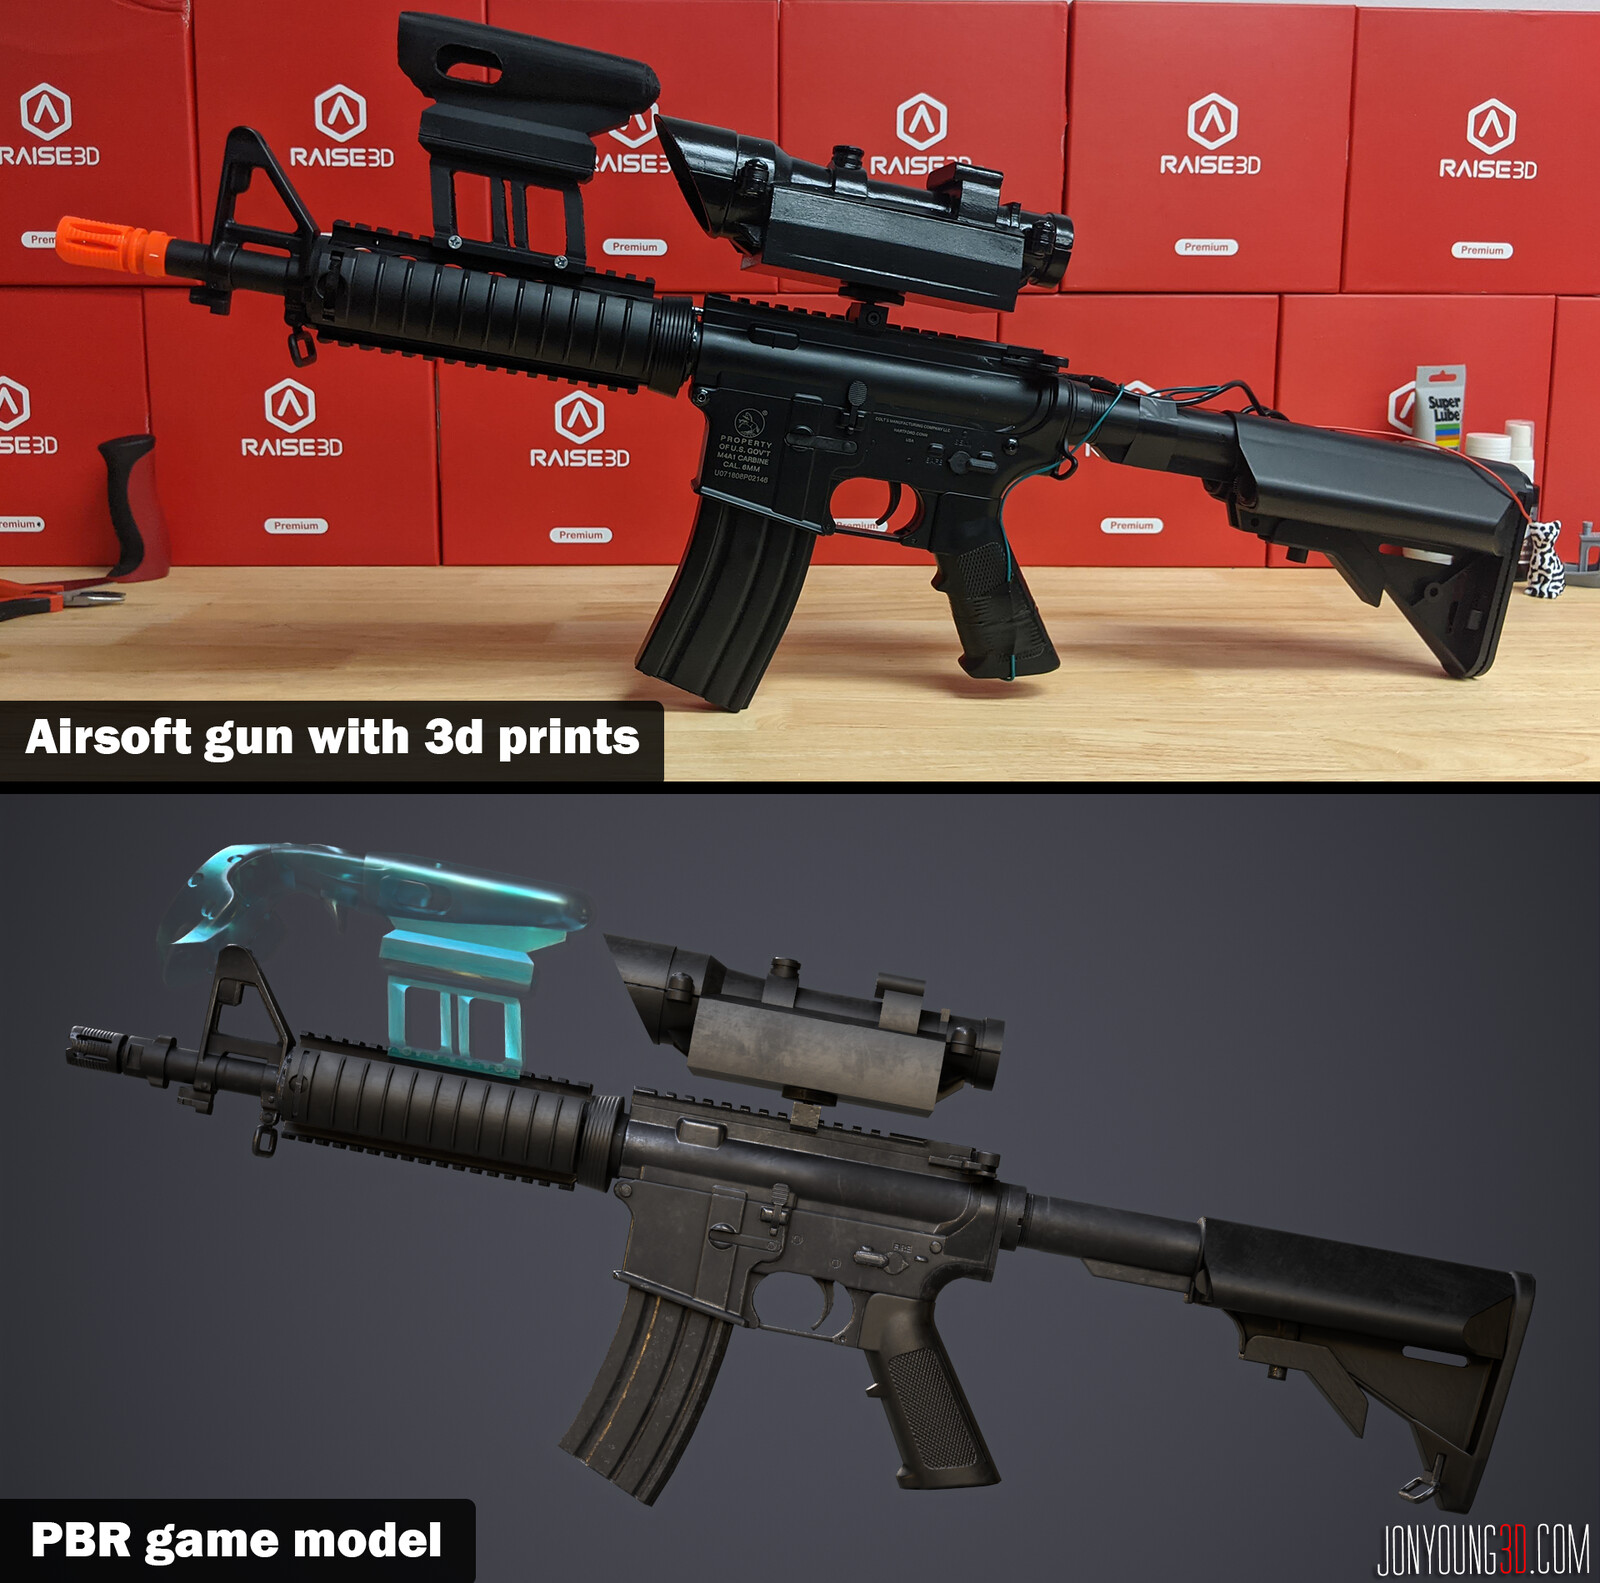 I adjusted and added new elements to an existing M4 model to more closely resemble the real mock rifle/mixed reality controller the player used. I then re-textured the model in Substance Painter, and designed and 3D printed various component attachments.